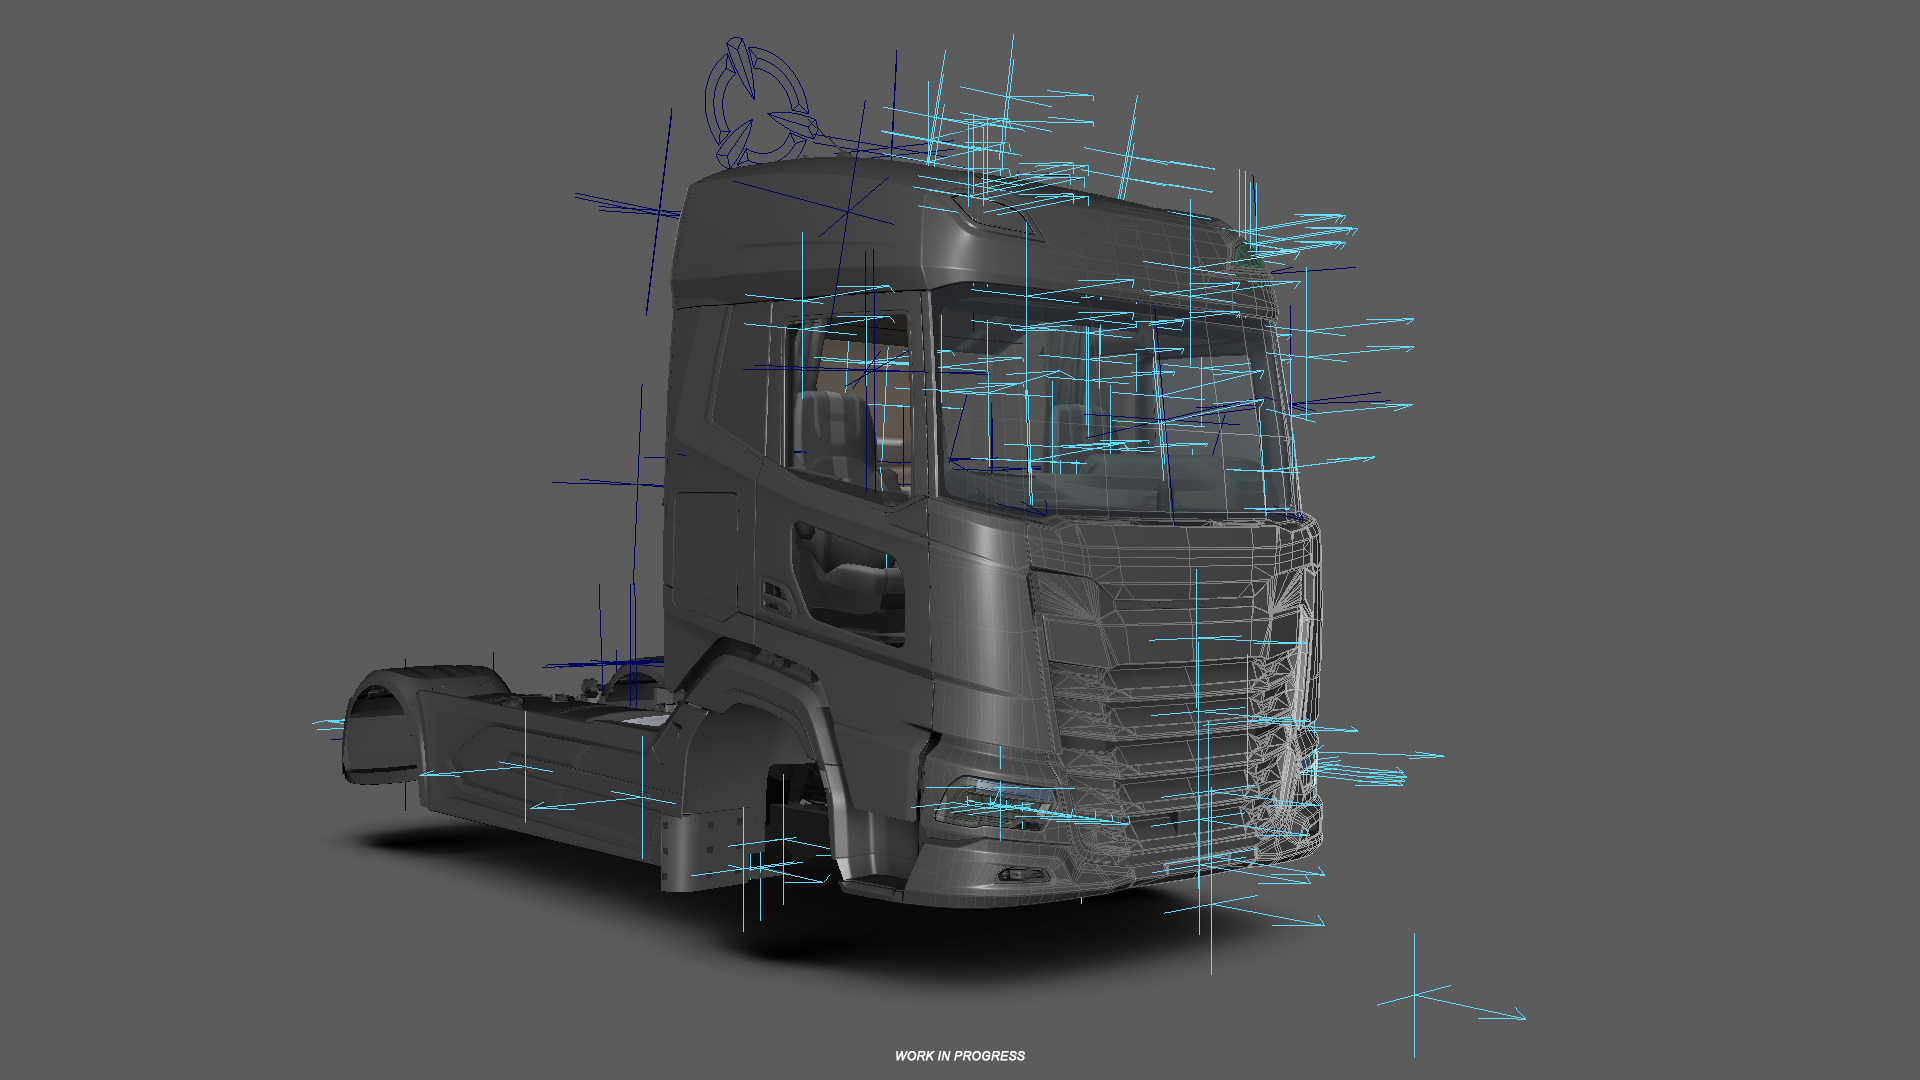 SCS Software's blog: The brand-new DAF XG and XG+ are here!